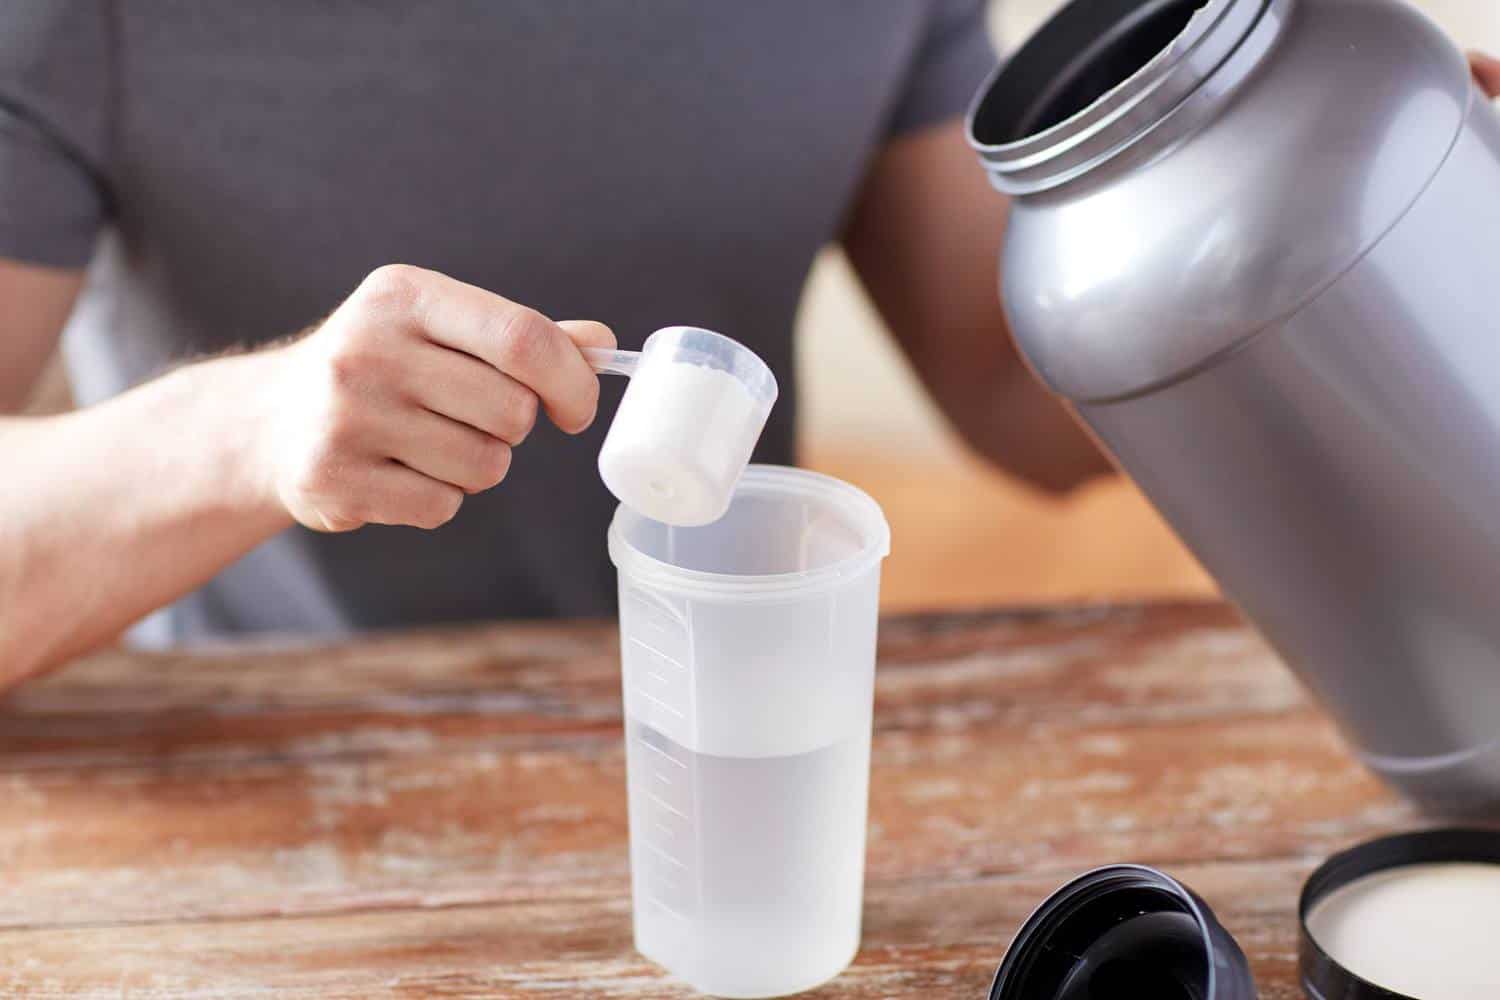 A person making a protein shake by adding powder to water.